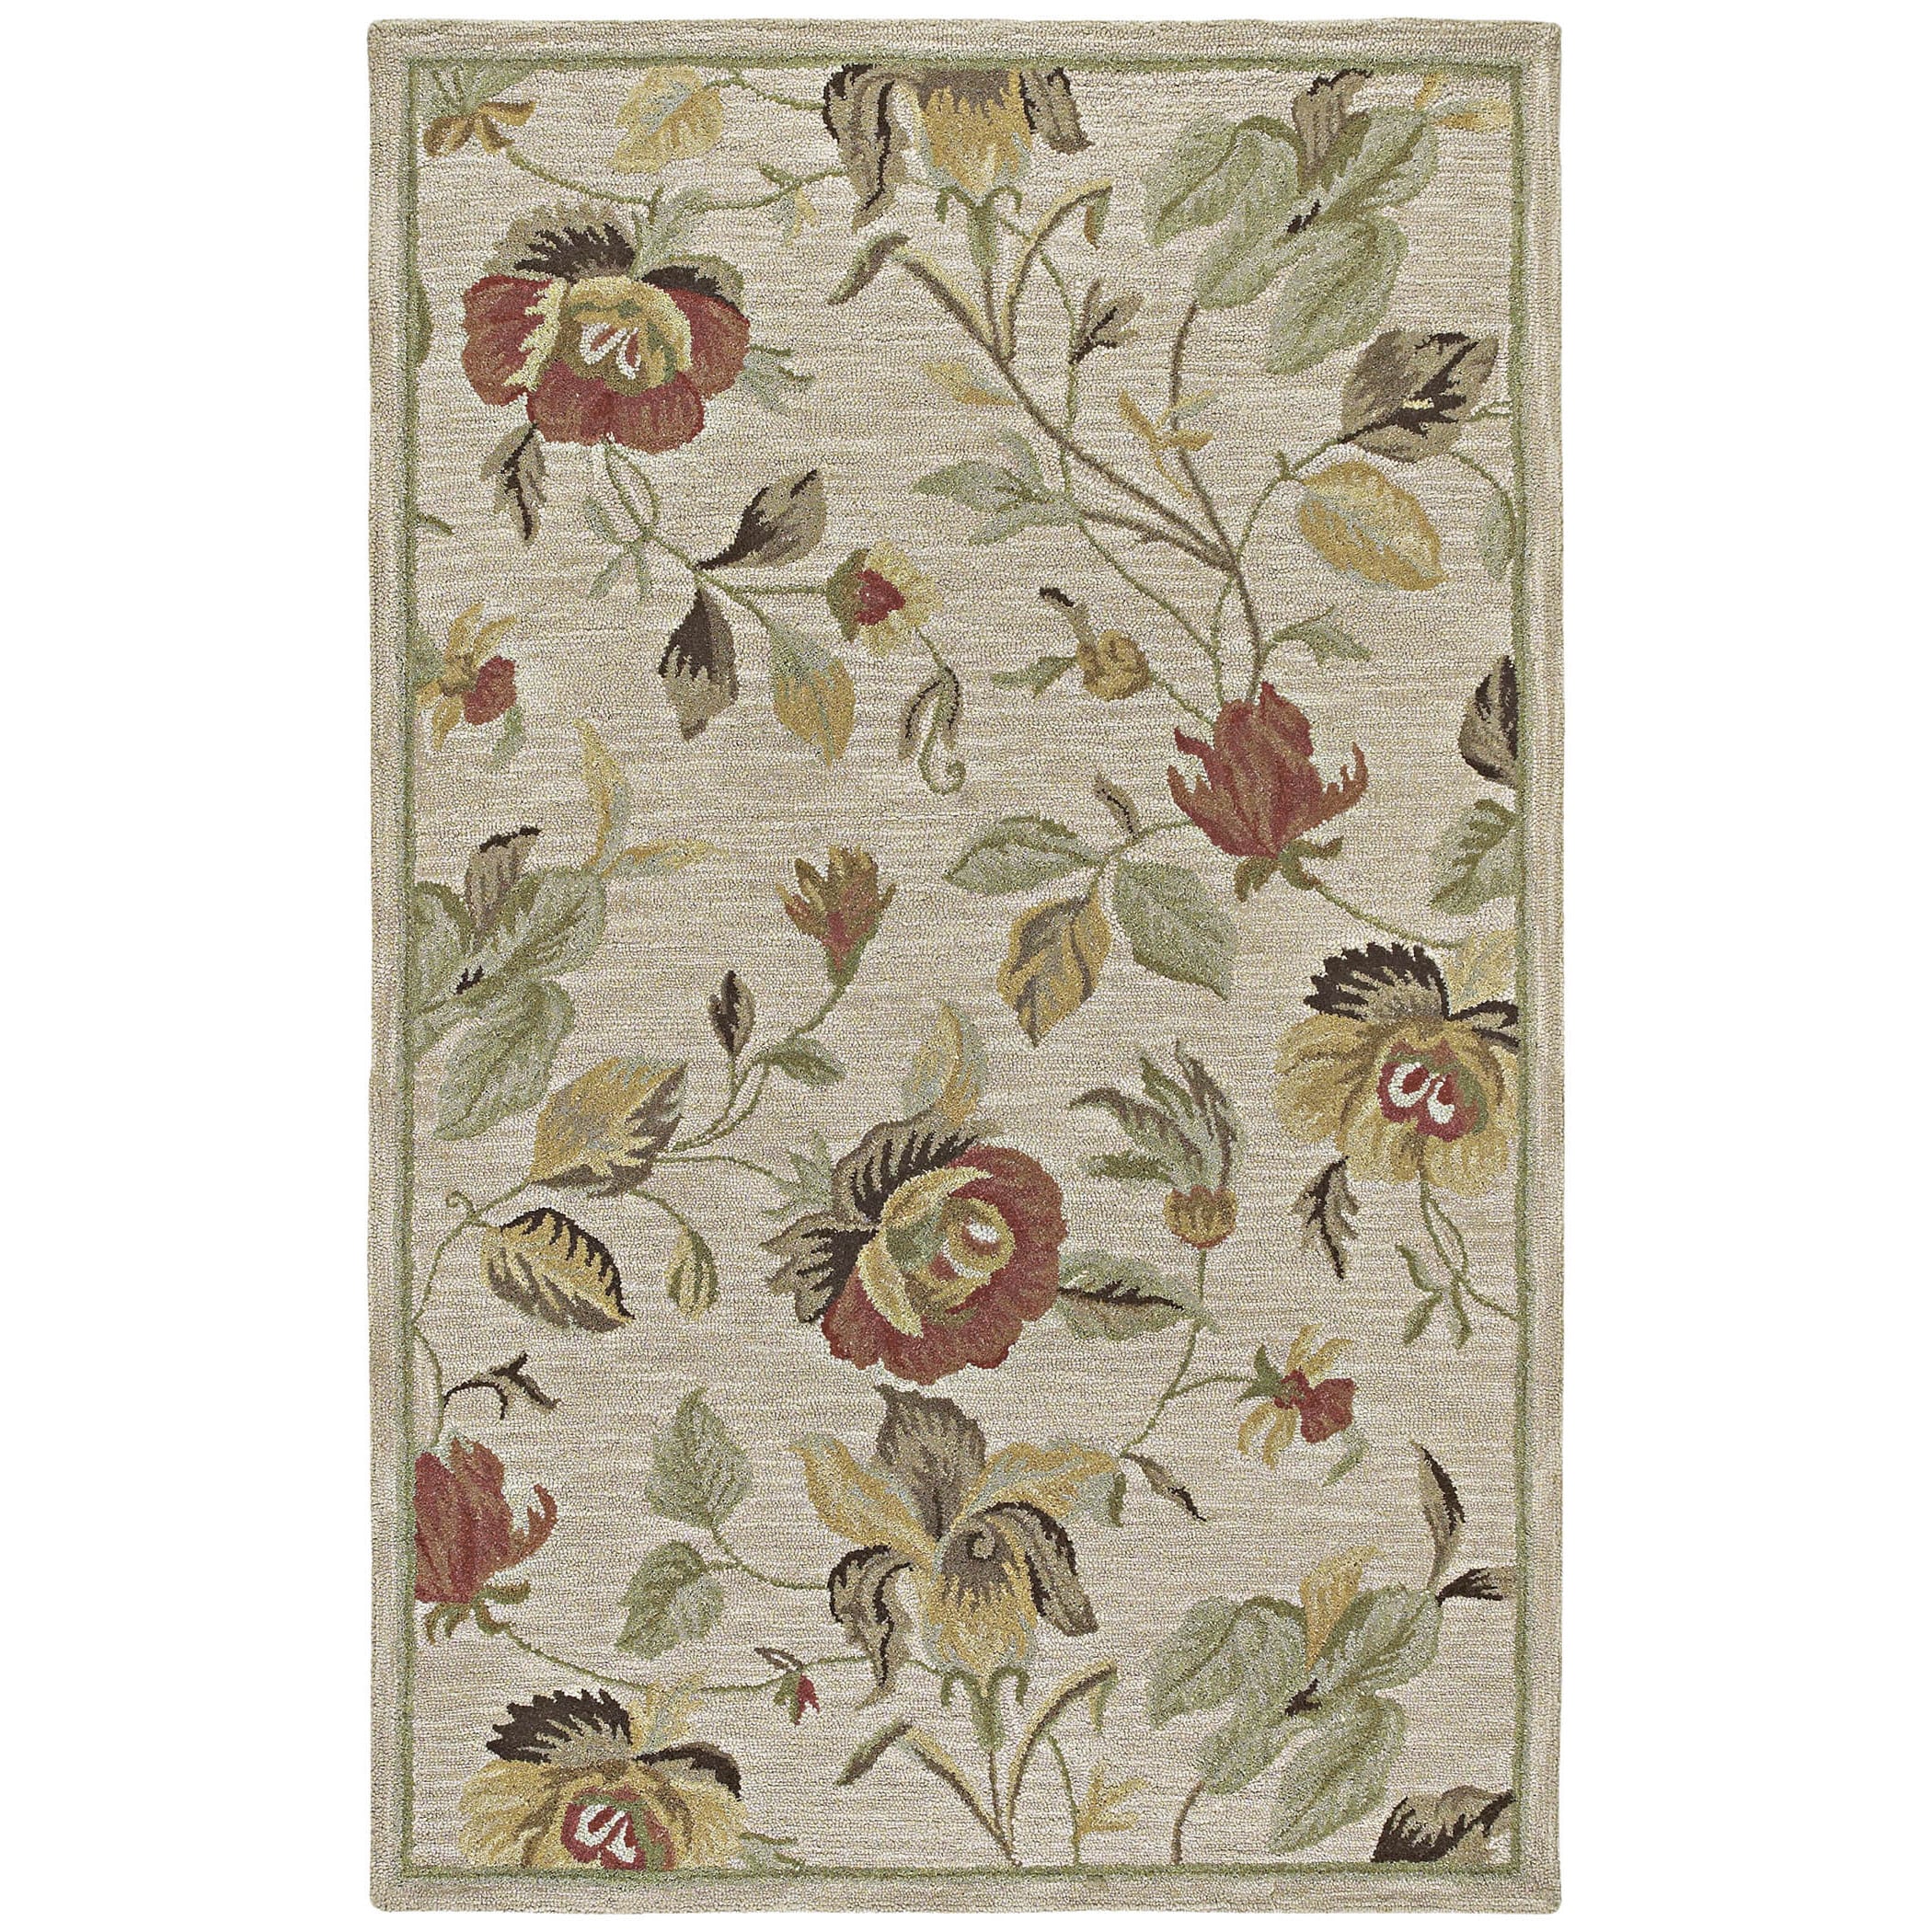 Hand tufted Lawrence Oatmeal Floral Wool Rug (76 X 90)